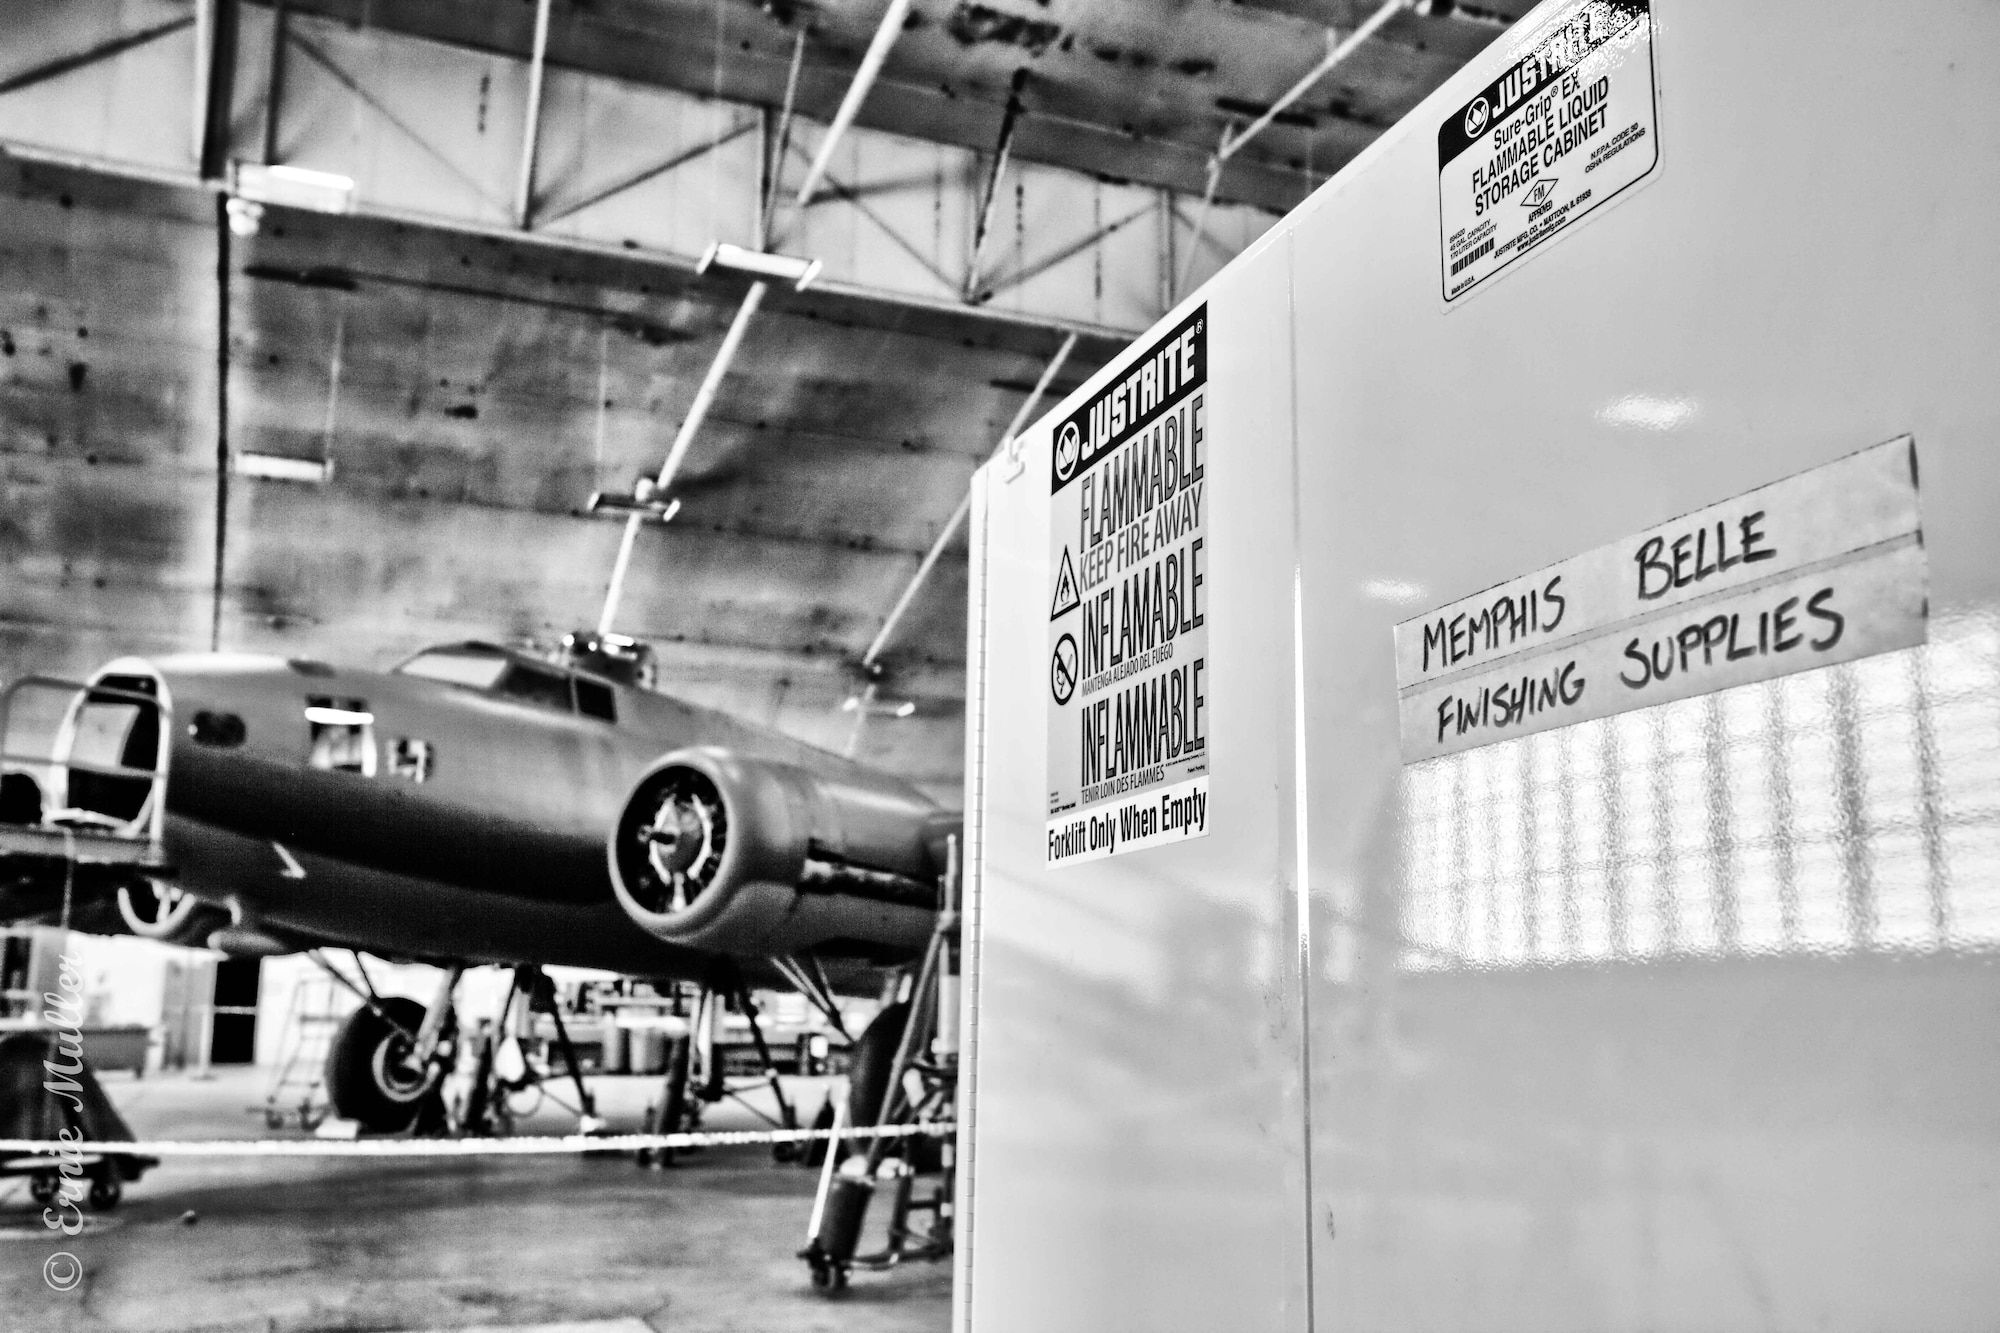 DAYTON, Ohio (01/04/2018) -- A view of the Boeing B-17F Memphis Belle™ in the museum's restoration hangar. Plans call for the aircraft to be placed on permanent public display in the WWII Gallery here at the National Museum of the U.S. Air Force on May 17, 2018. (U.S. Air Force photo by Ernie Muller)